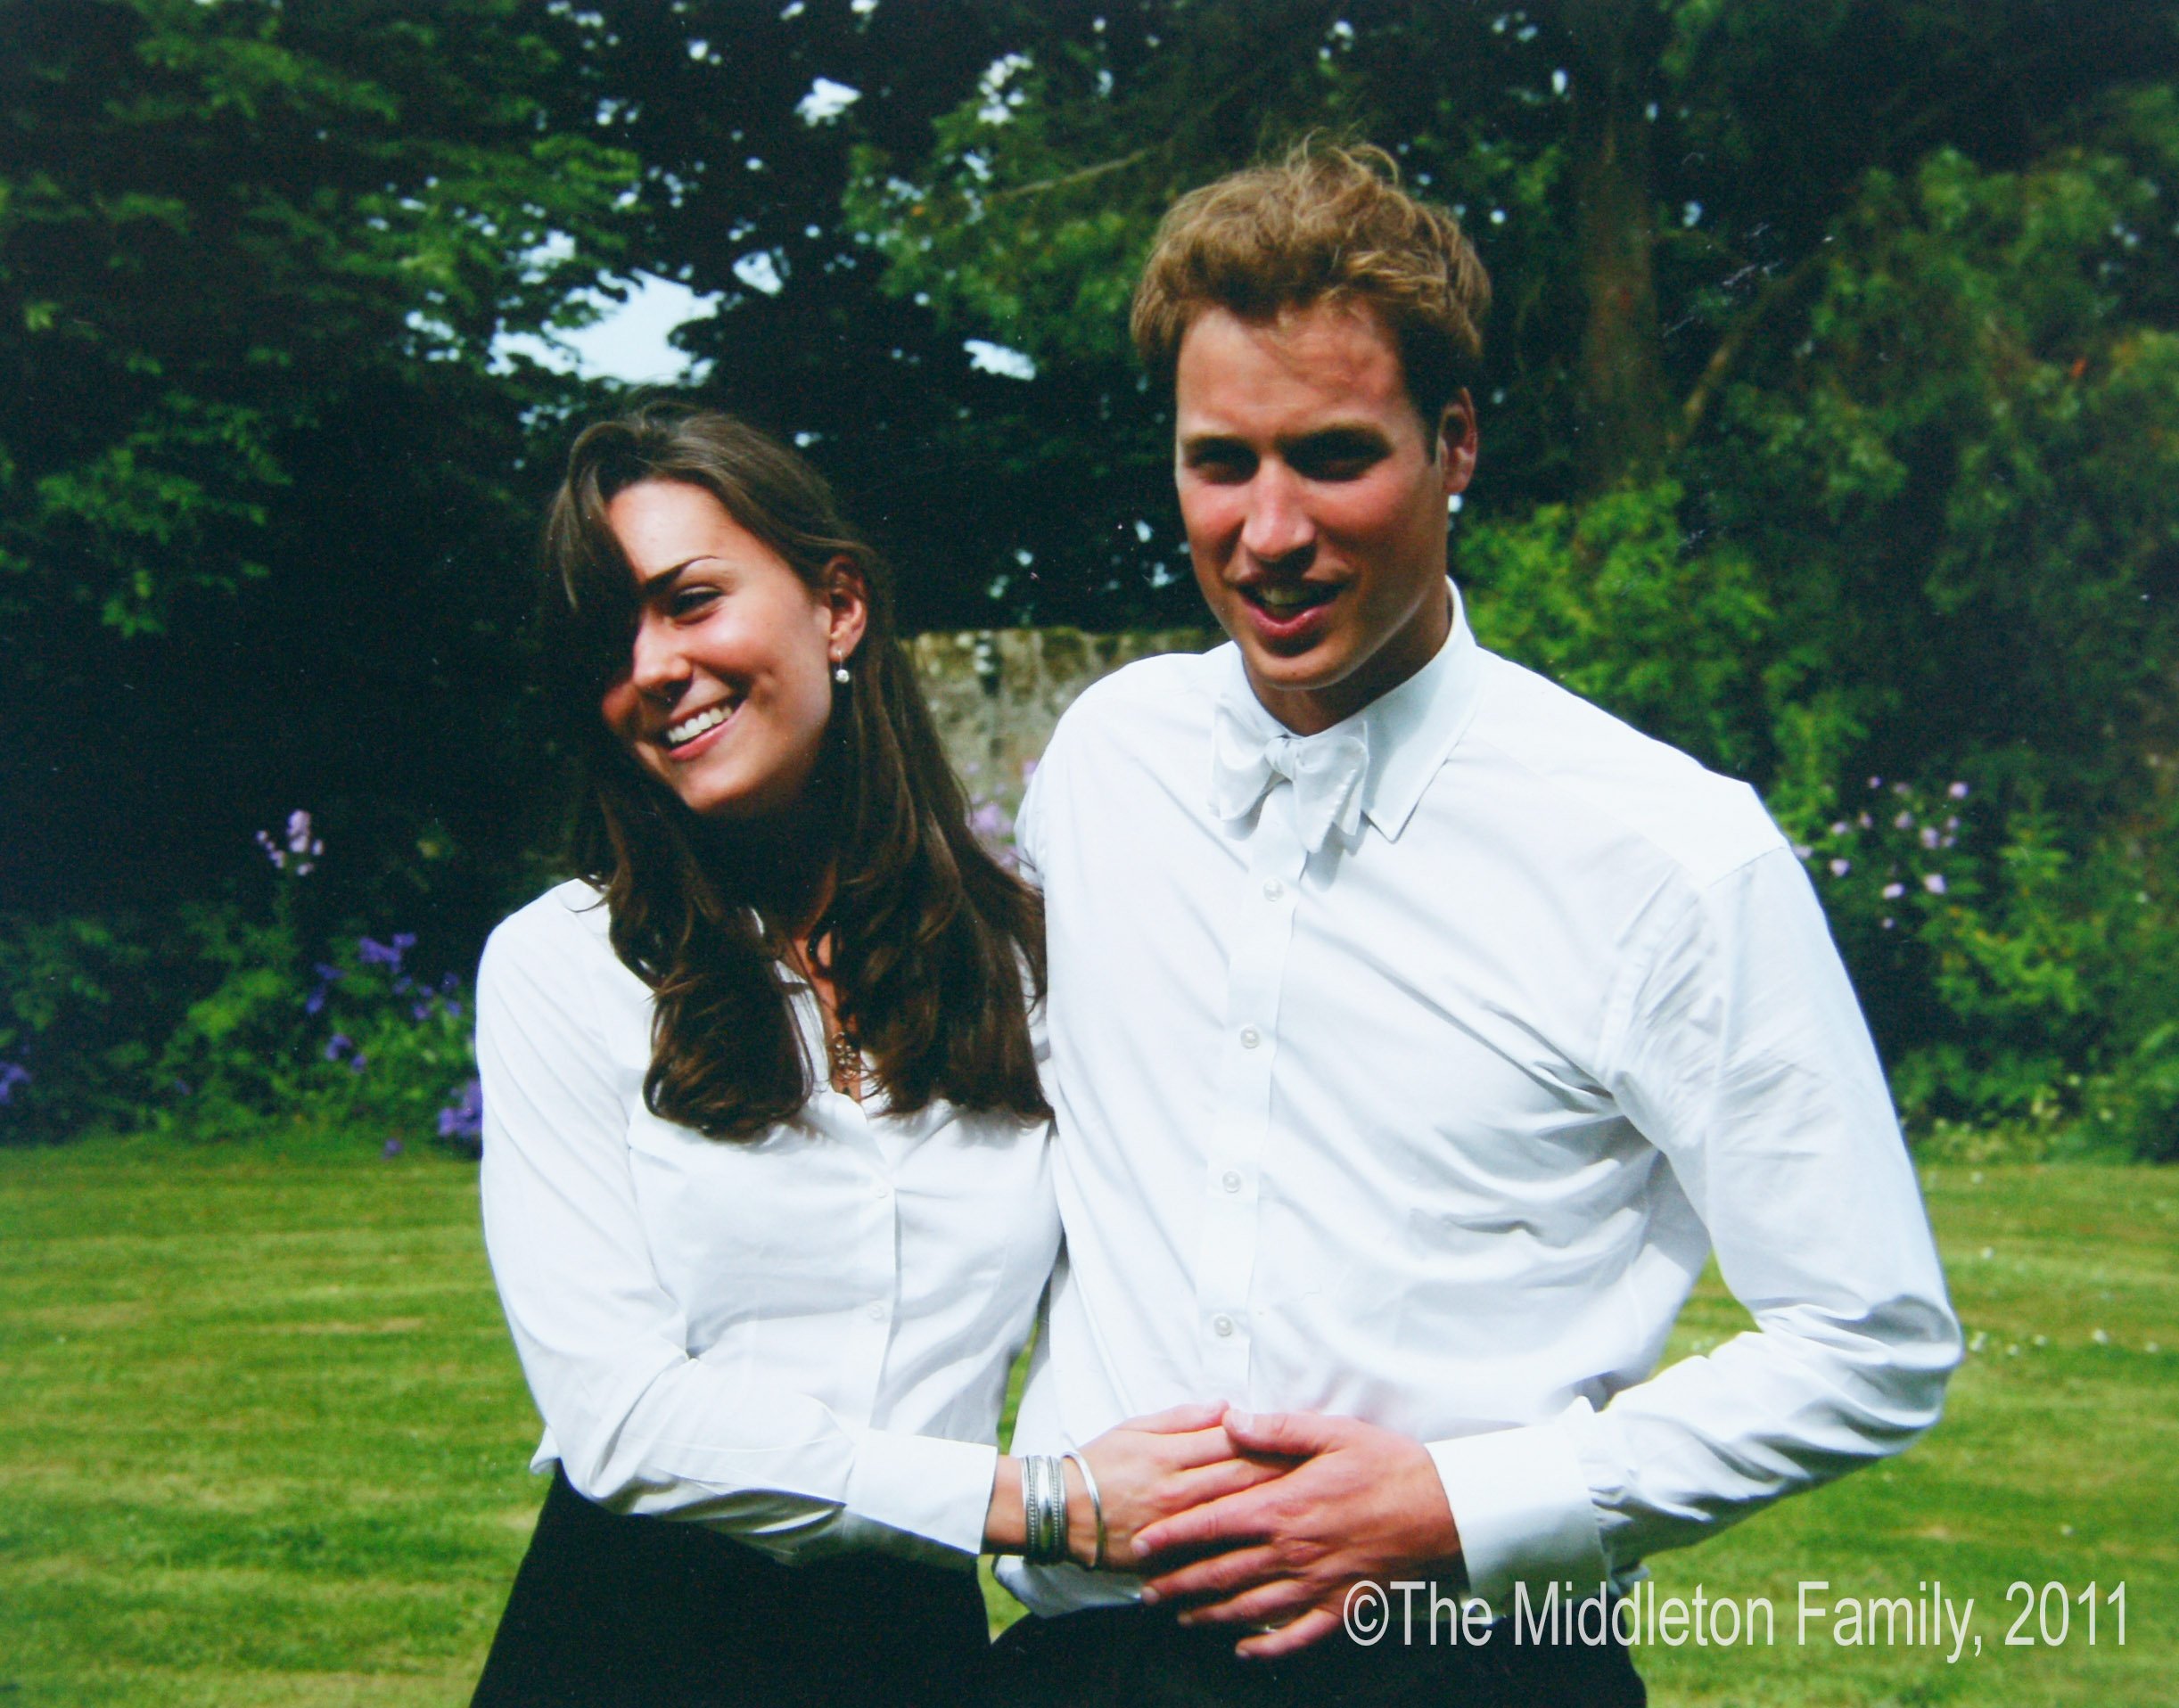 Prince William and Kate Middleton on their graduation day from St. Andrew's University on June 23, 2005 in Scotland. | Source: Getty Images